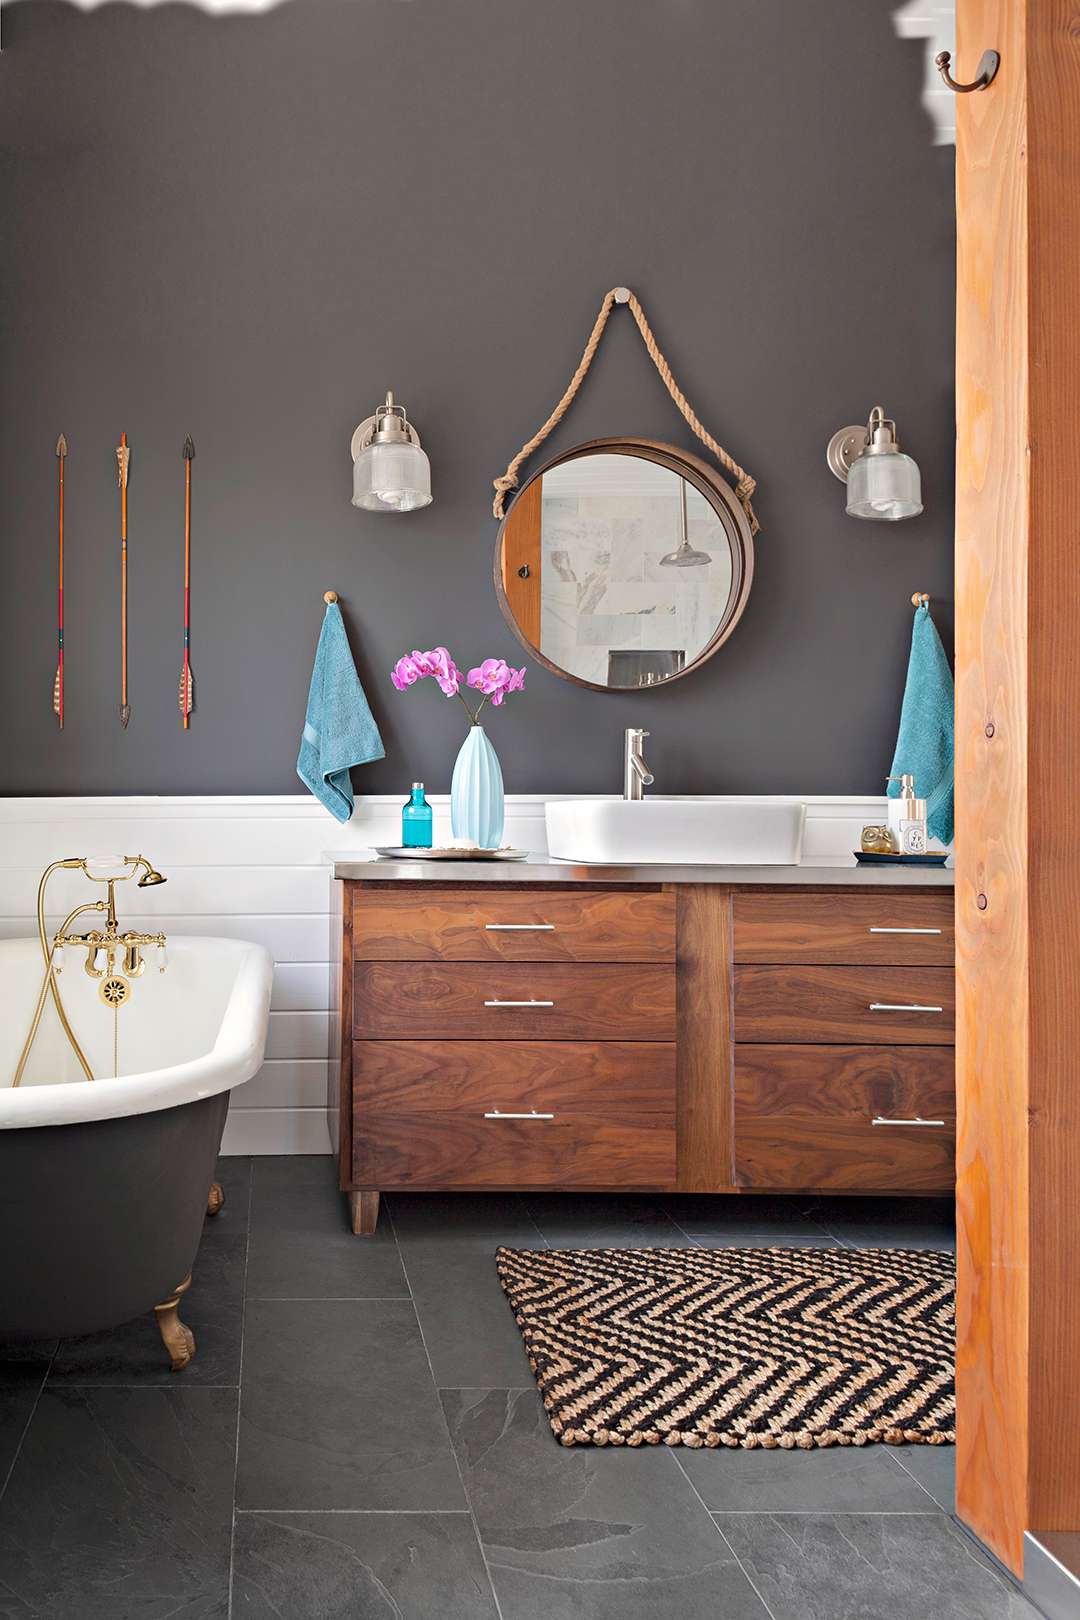 The 12 Best Bathroom Paint Colors Our Editors Swear By